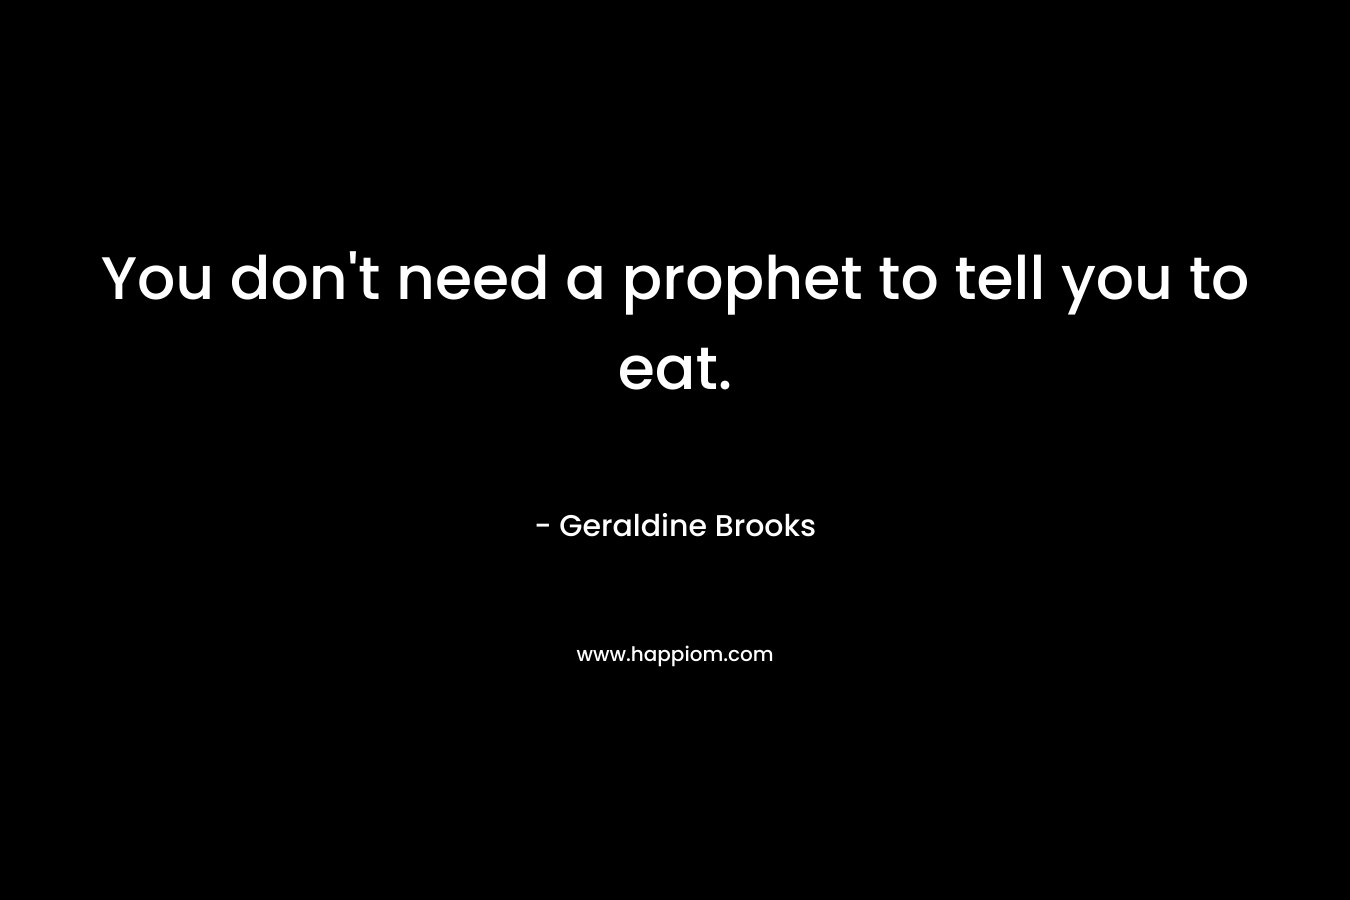 You don’t need a prophet to tell you to eat. – Geraldine Brooks